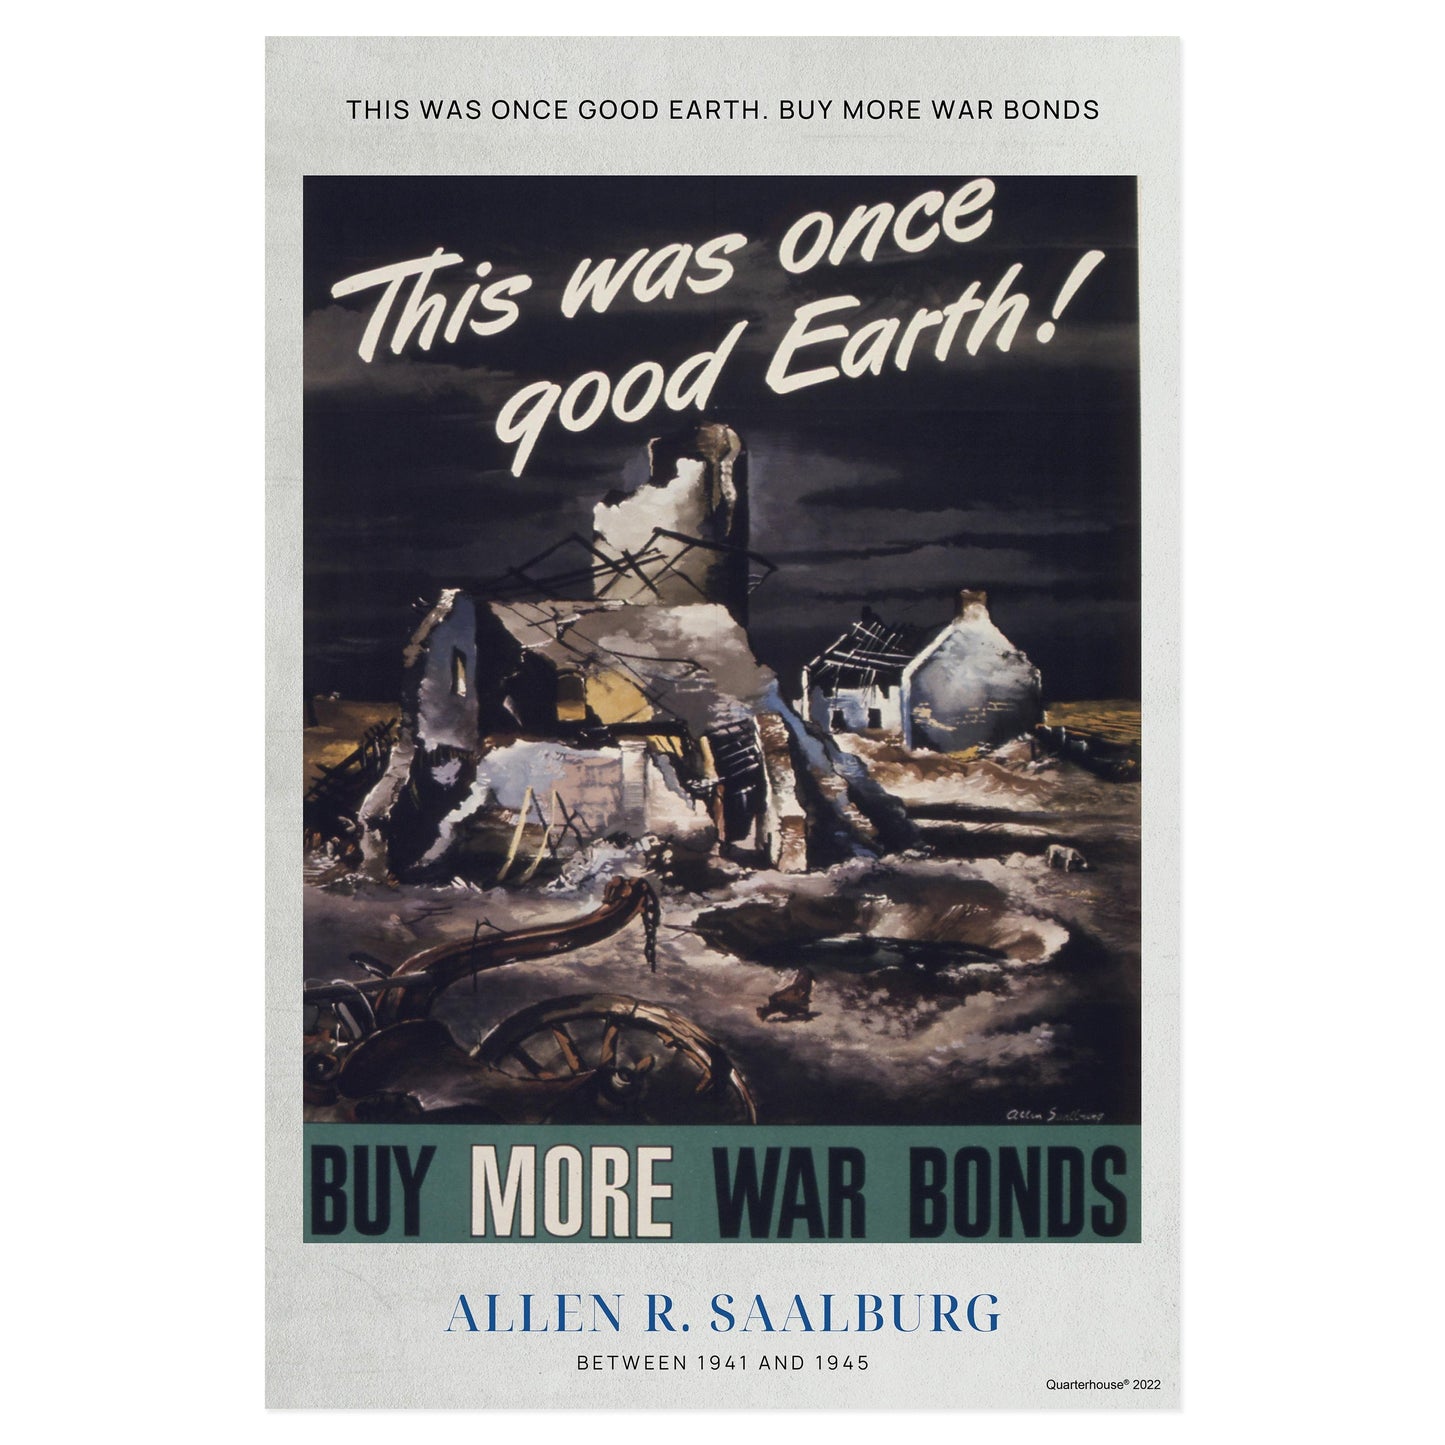 Quarterhouse WWII, 'This Was Once Good Earth, Buy More War Bonds' Poster, Social Studies Classroom Materials for Teachers